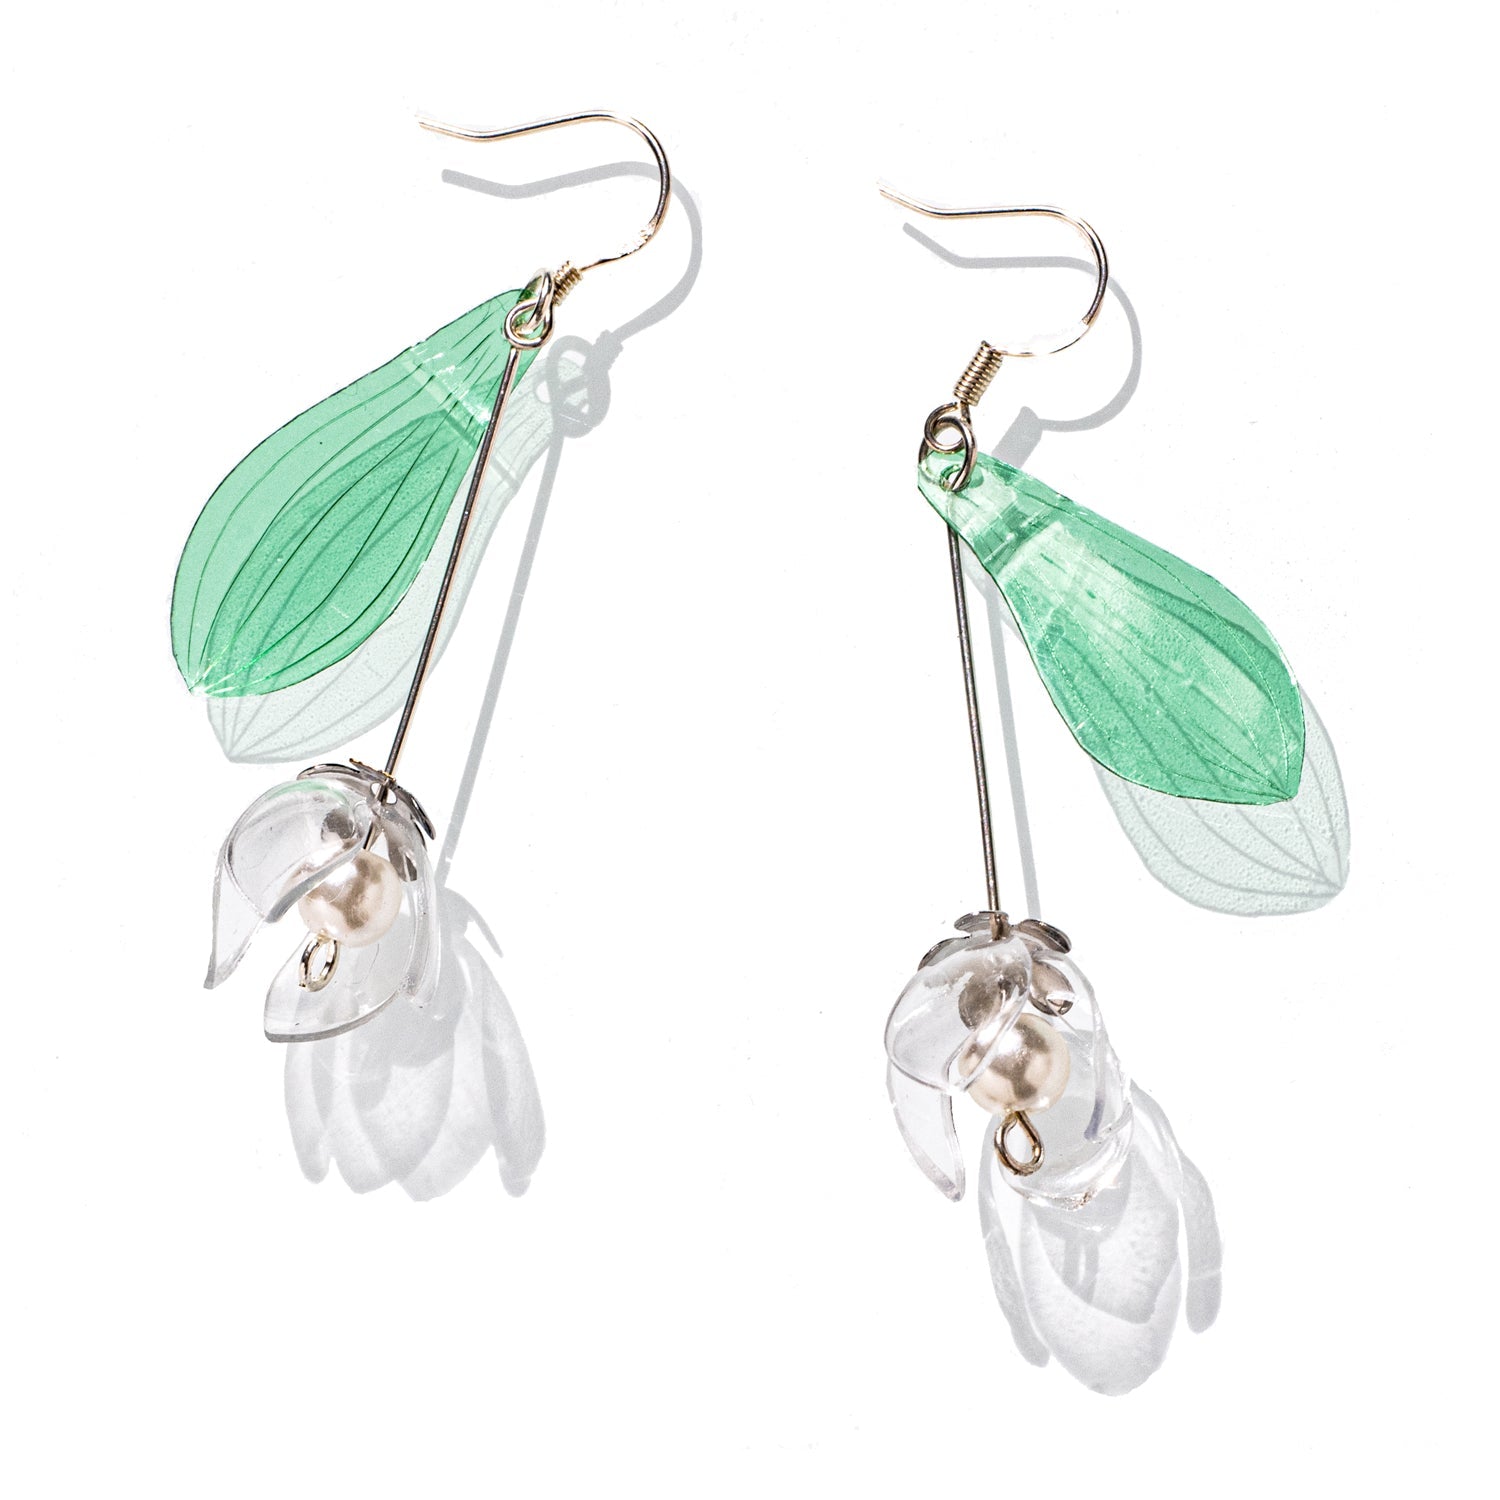 Blumenohrringe – Maiglöckchen - Just a Flower Earrings - Lily of the Valley-0